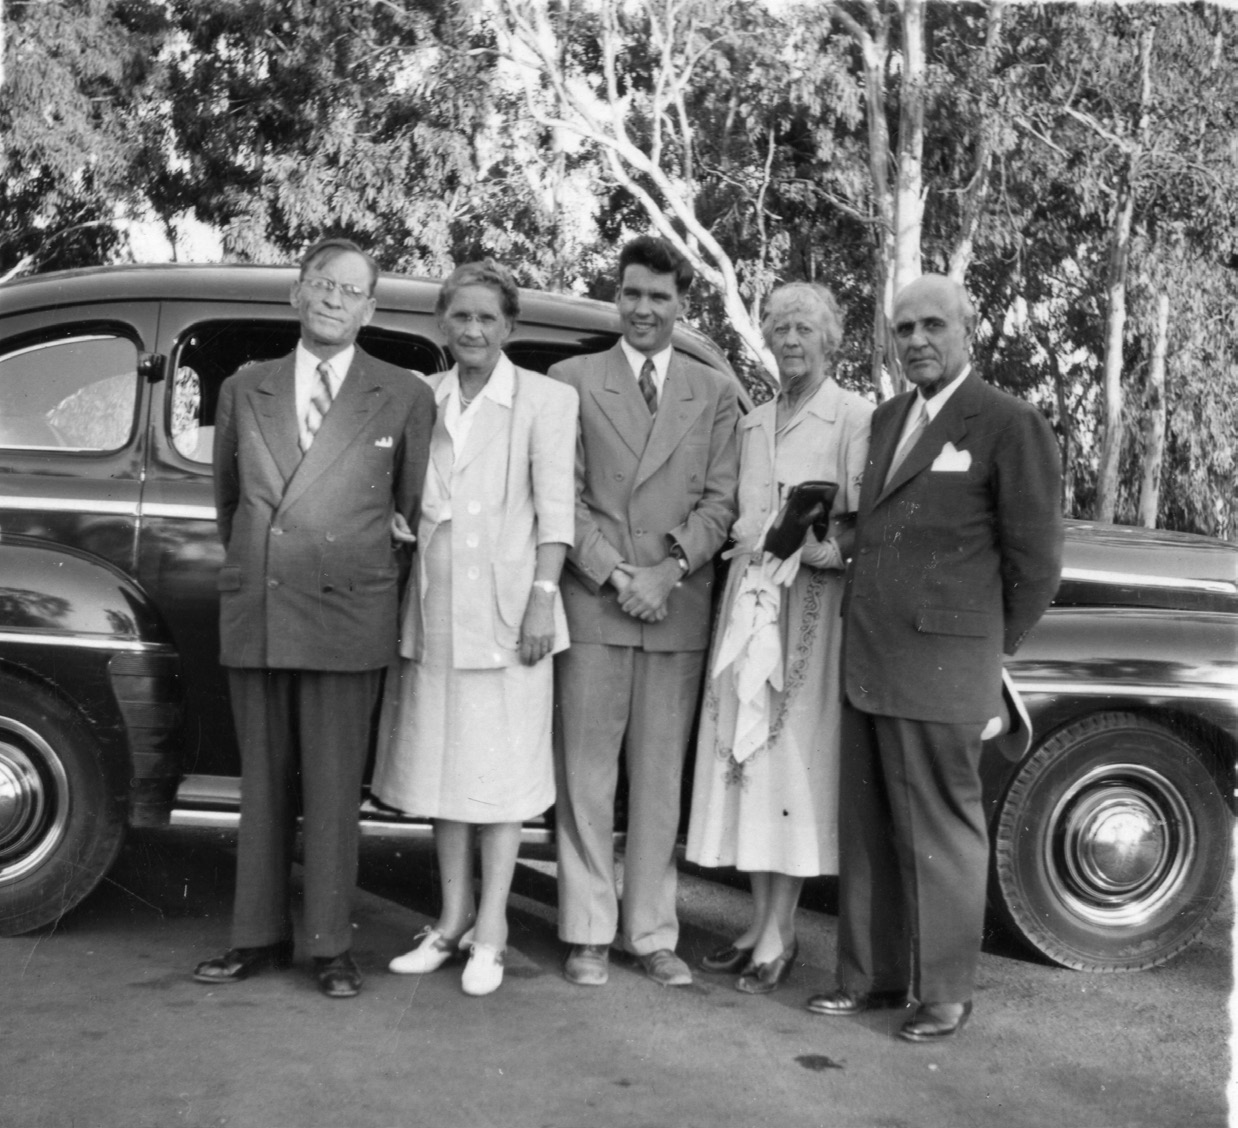 Howard J. Marsh, the mission secretary (middle), traveled with the Youngs and Richardses throughout Argentina. The Church News caption for this photo stated they “Drove 2,600 miles of country roads” in this car. Courtesy of CHL.